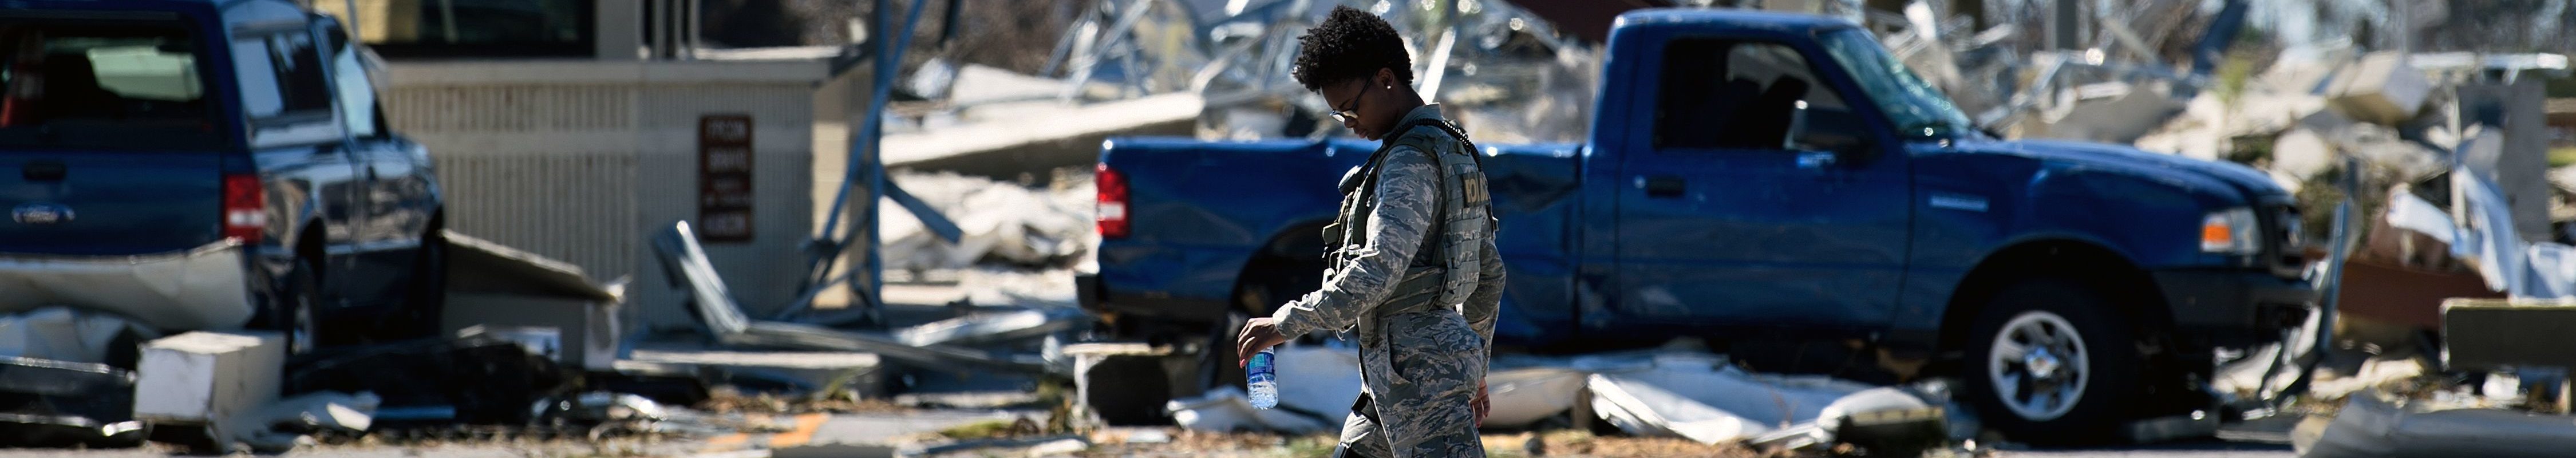 A military police officer walks near a destroyed gate in Tyndall Air Force Base, in Florida in the aftermath of Hurricane Michael on October 12, 2018. Rubble from the gate covers the floor. The two guard booths on either side of the former gate appear damaged, but are still standing.